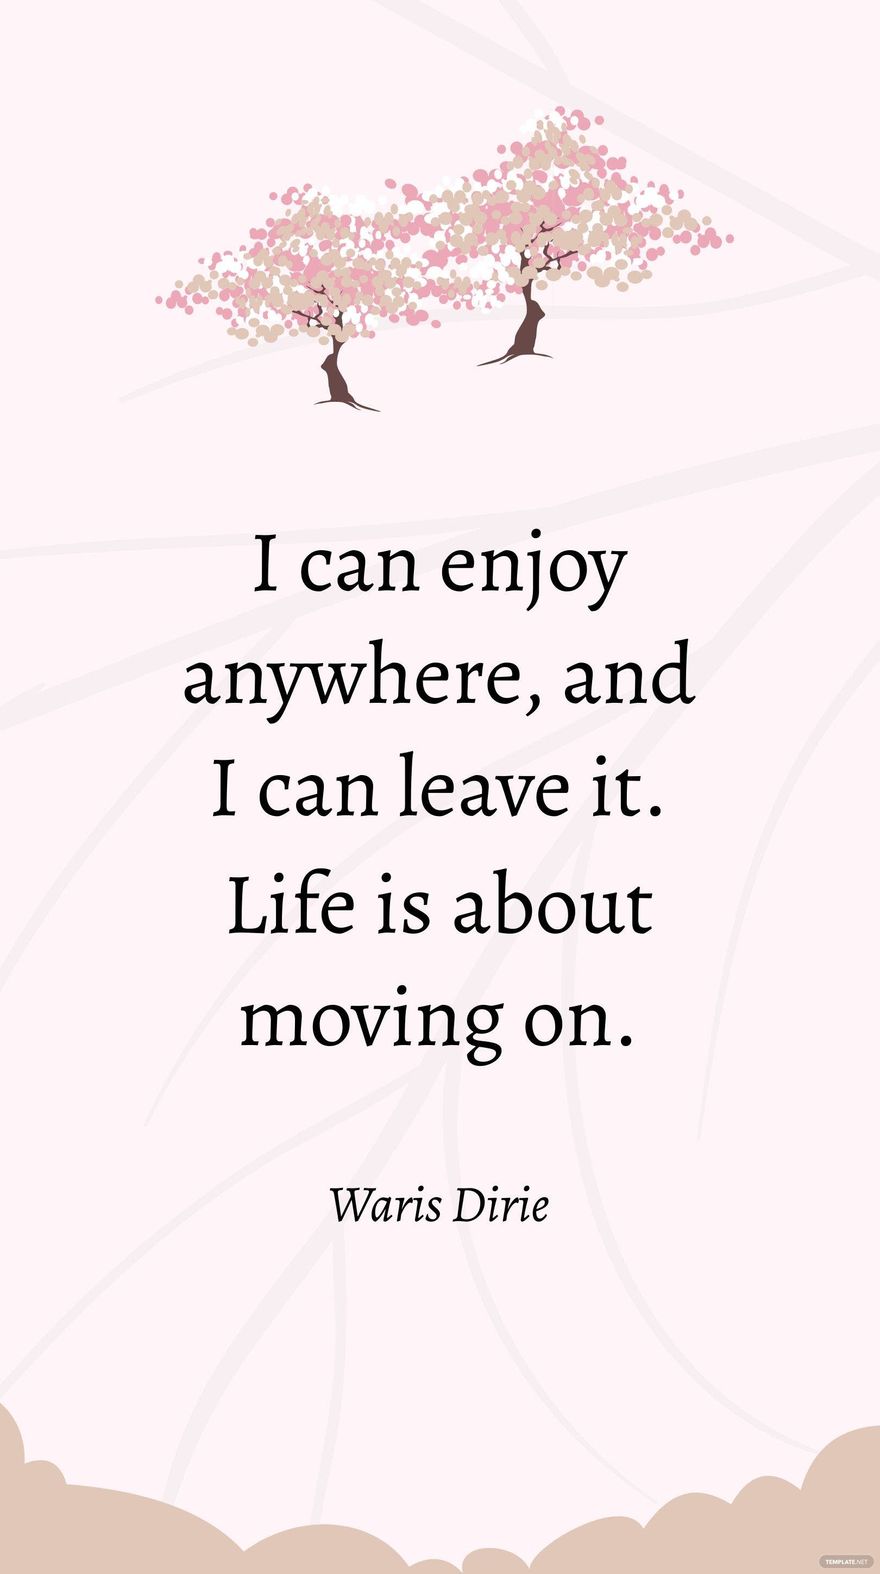 Waris Dirie - I can enjoy anywhere, and I can leave it. Life is about moving on.